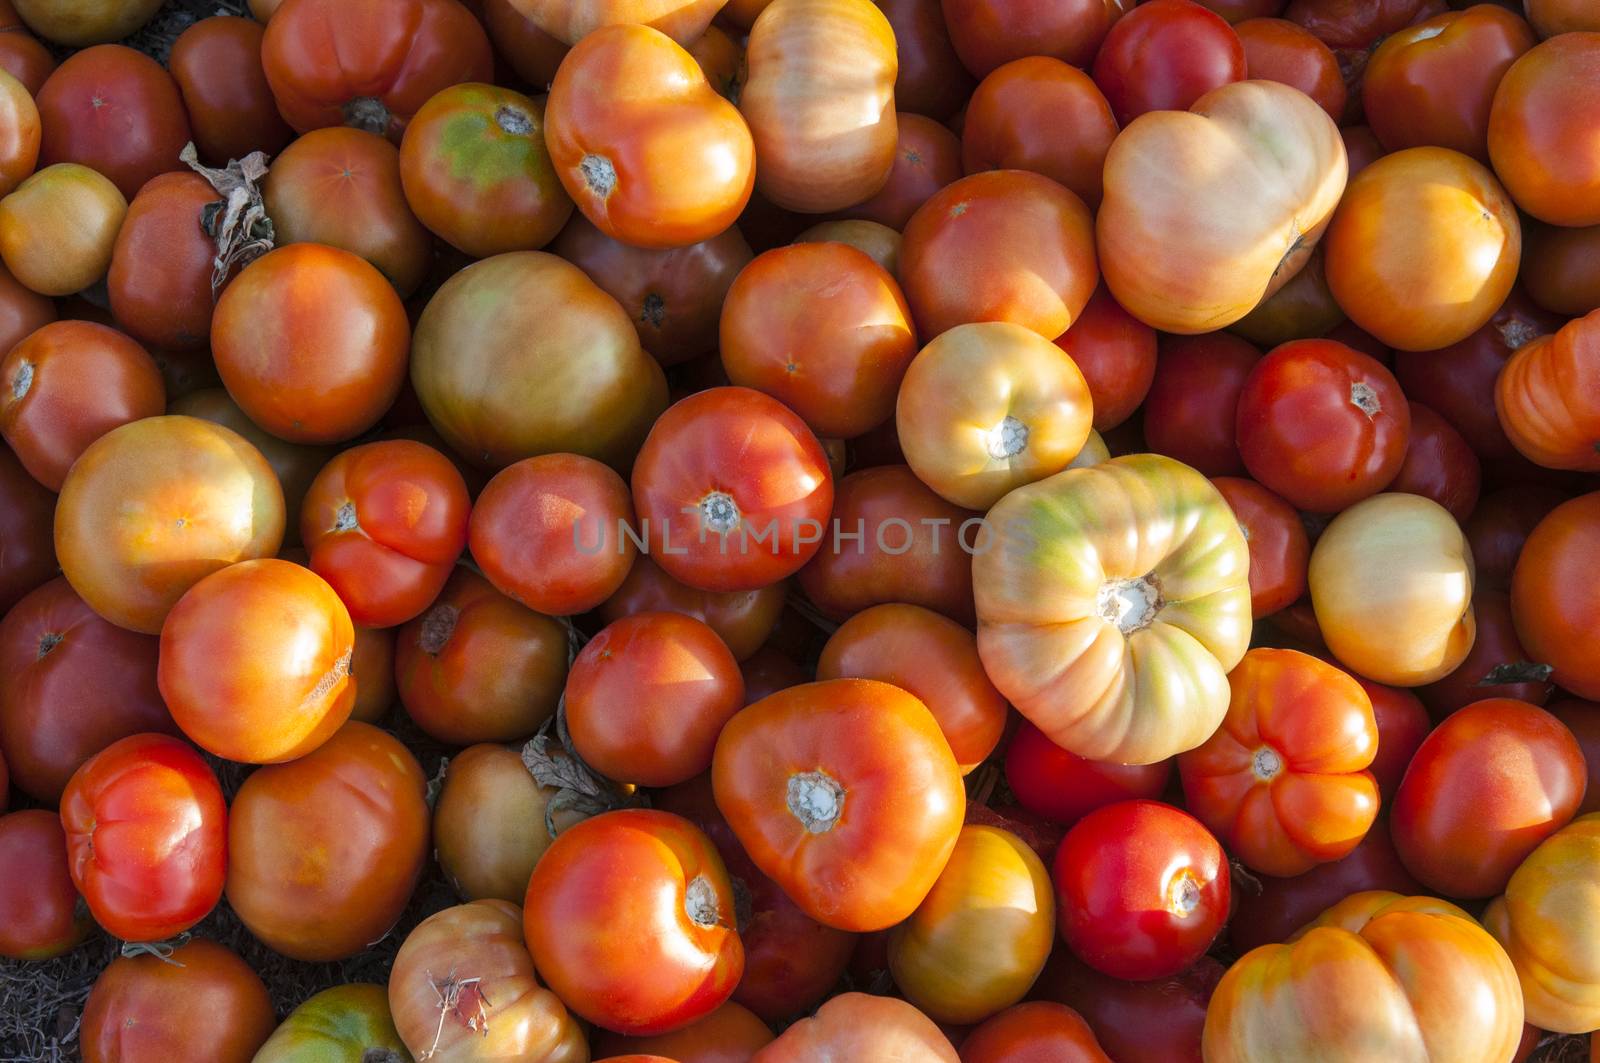 Pile of ripe tomatoes